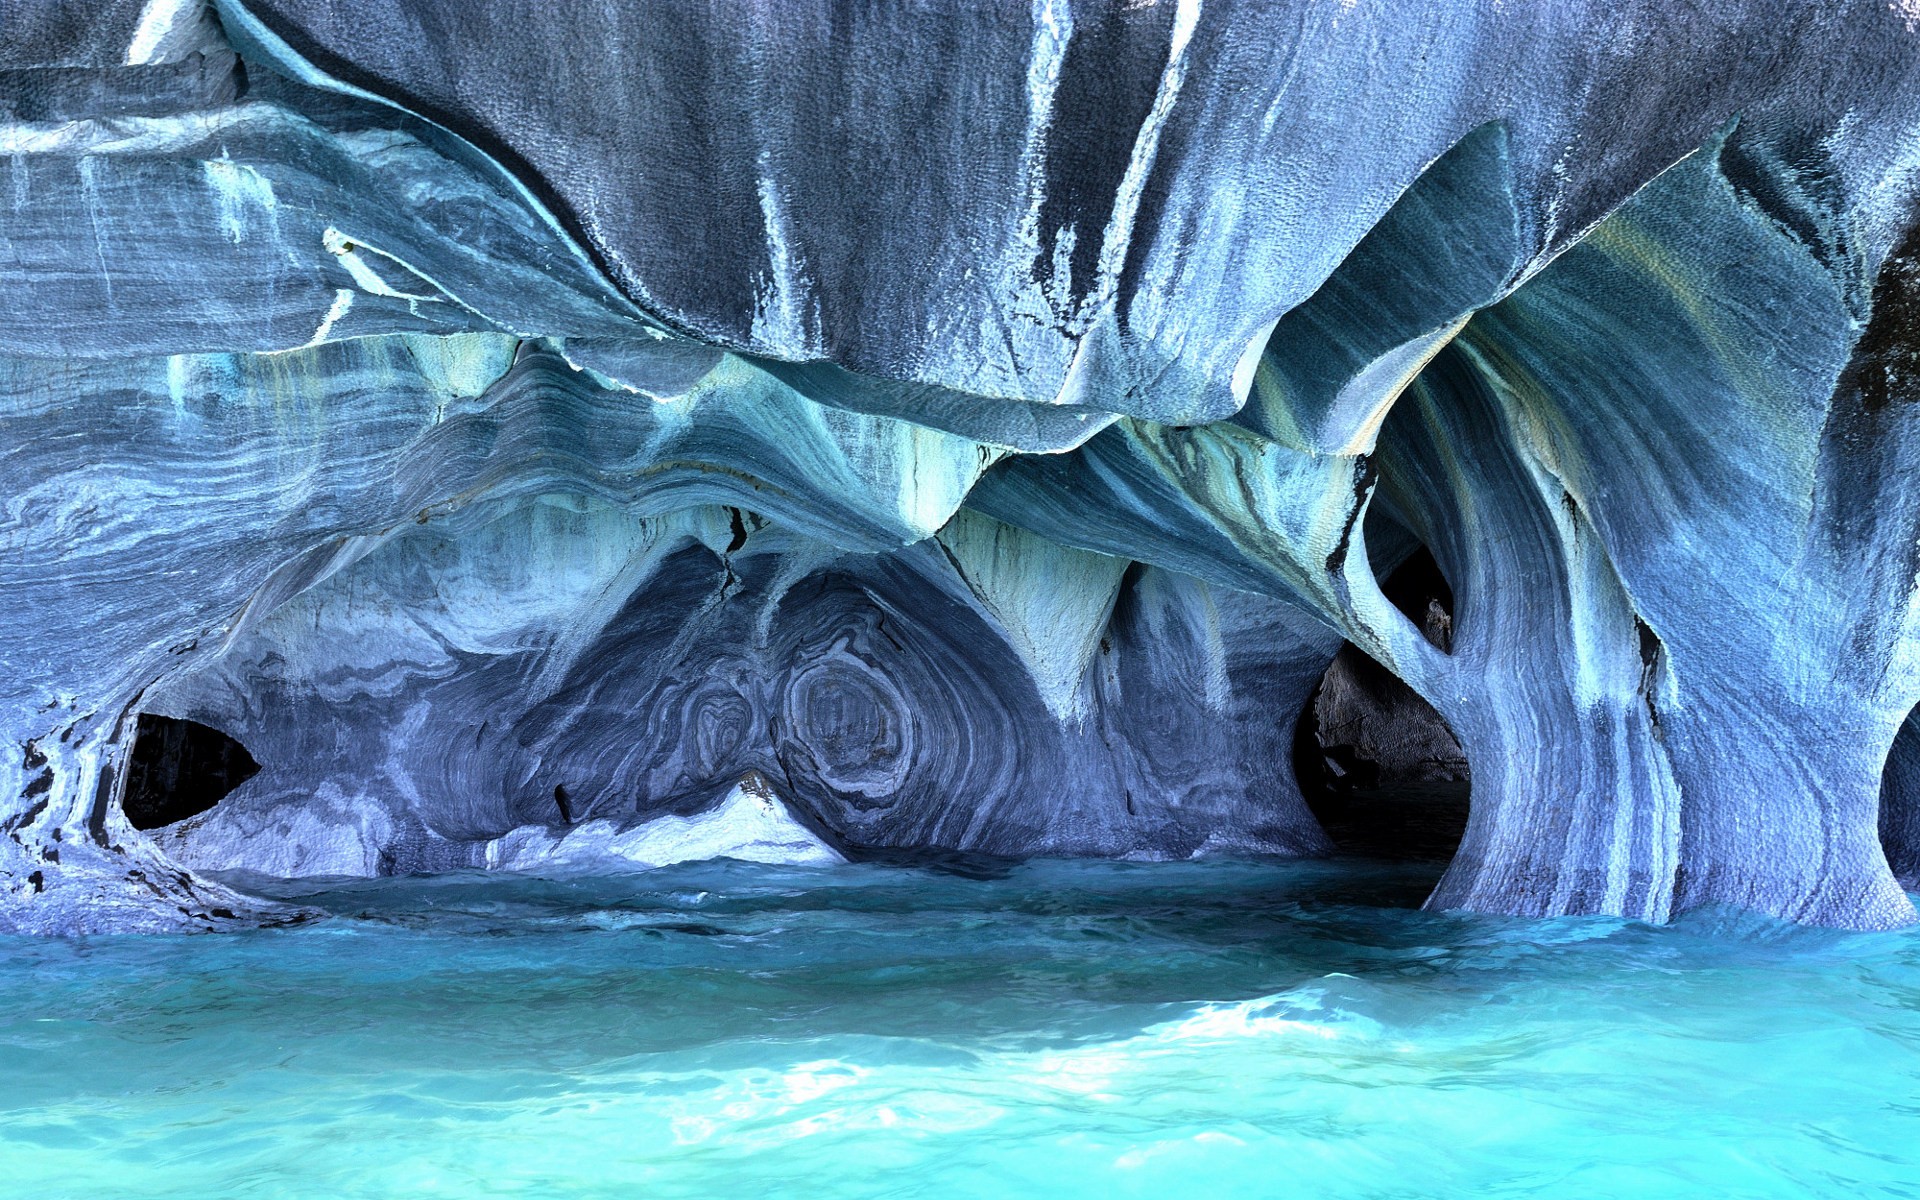 General 1920x1200 nature cave stones abstract rocks marble Patagonia South America blue sea waves Chile turquoise cyan rock formation Lago Gral. Garrera